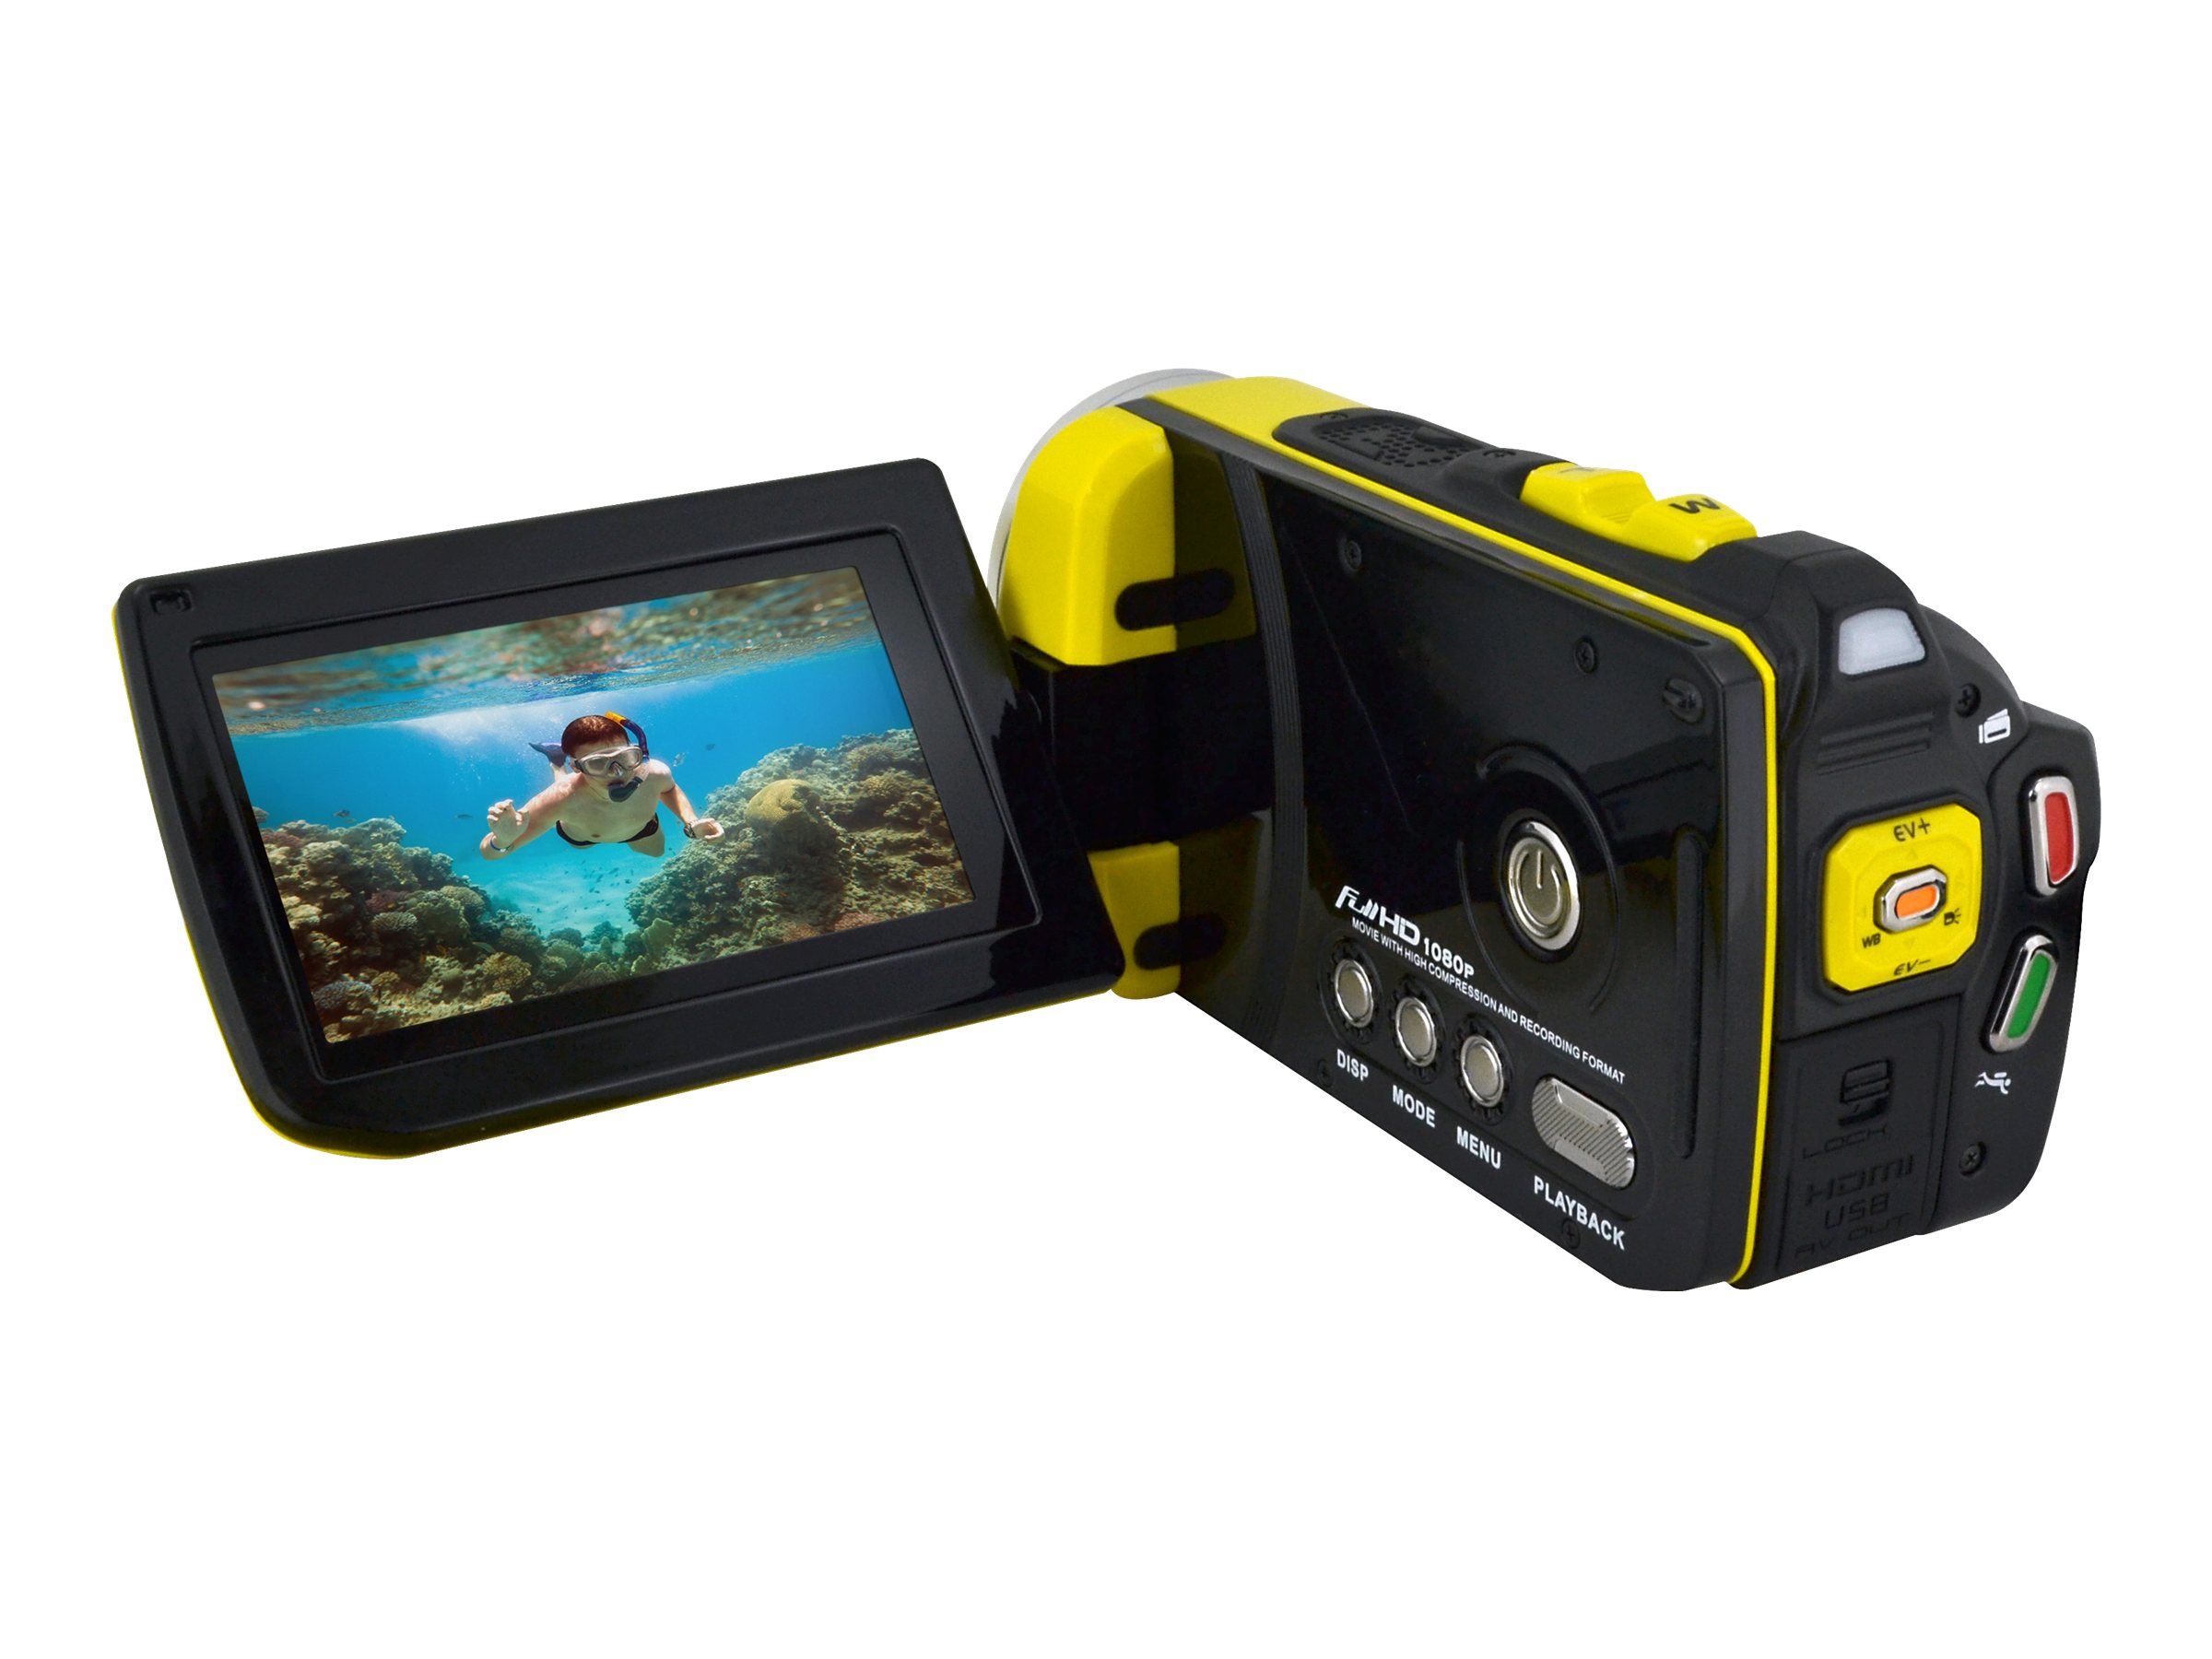 Bell+Howell Splash WV30HD Yellow 1080p HD Waterproof Camcorder with 8x Digital Zoom, 3" Widescreen Display and Pre-recording Technology - image 2 of 2